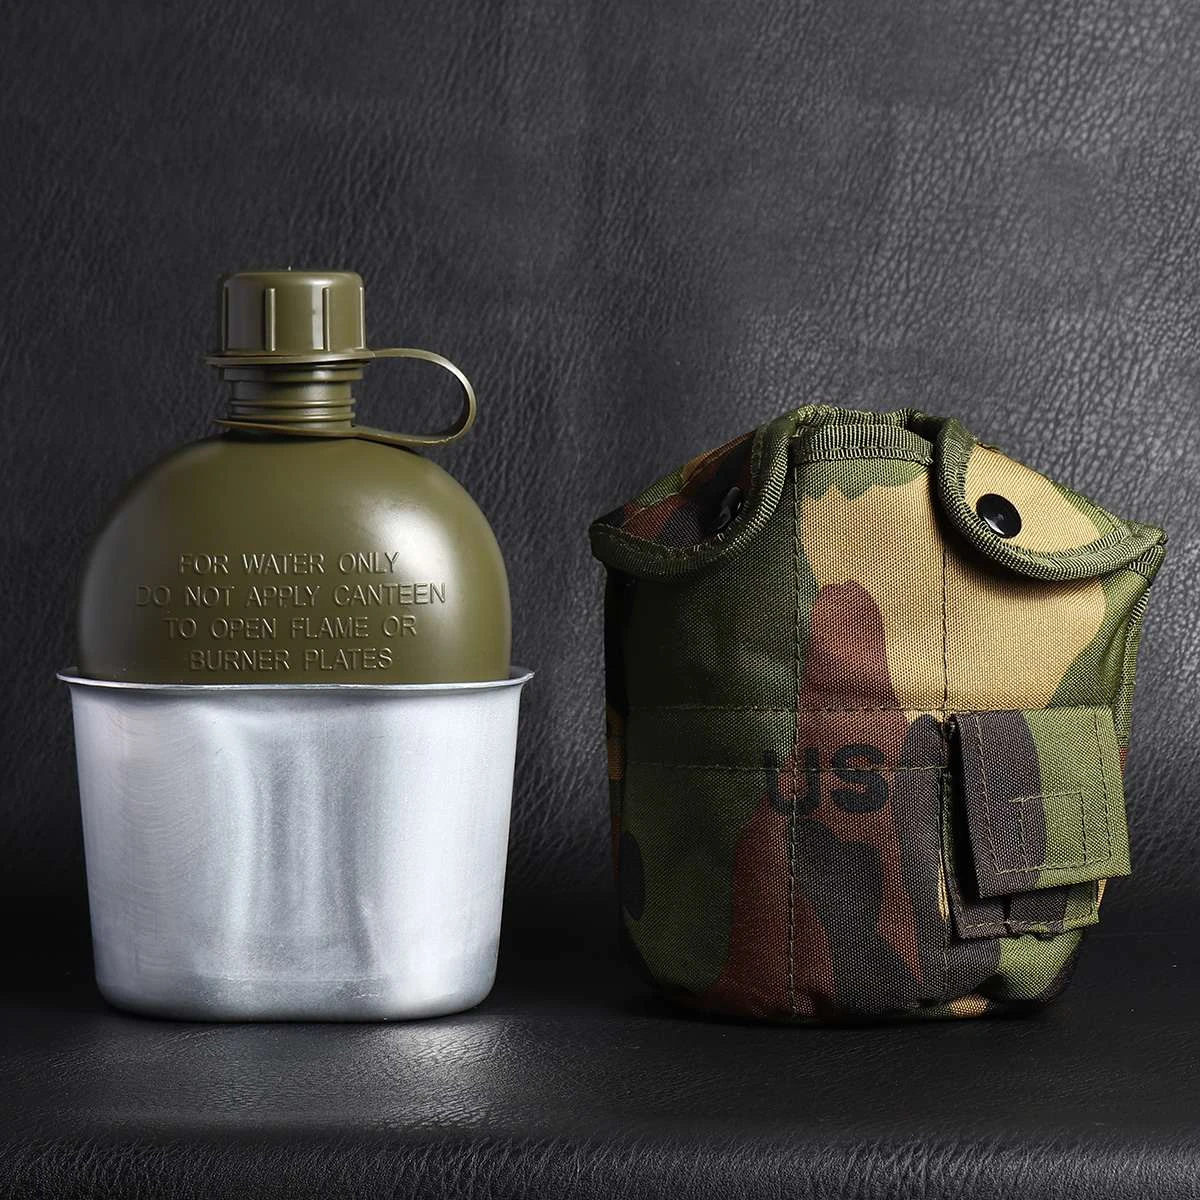 Heavy Cover Army Water Bottle Aluminum Cooking Cup Military Canteen Camping Hiking Survival Kettle Outdoor Tableware